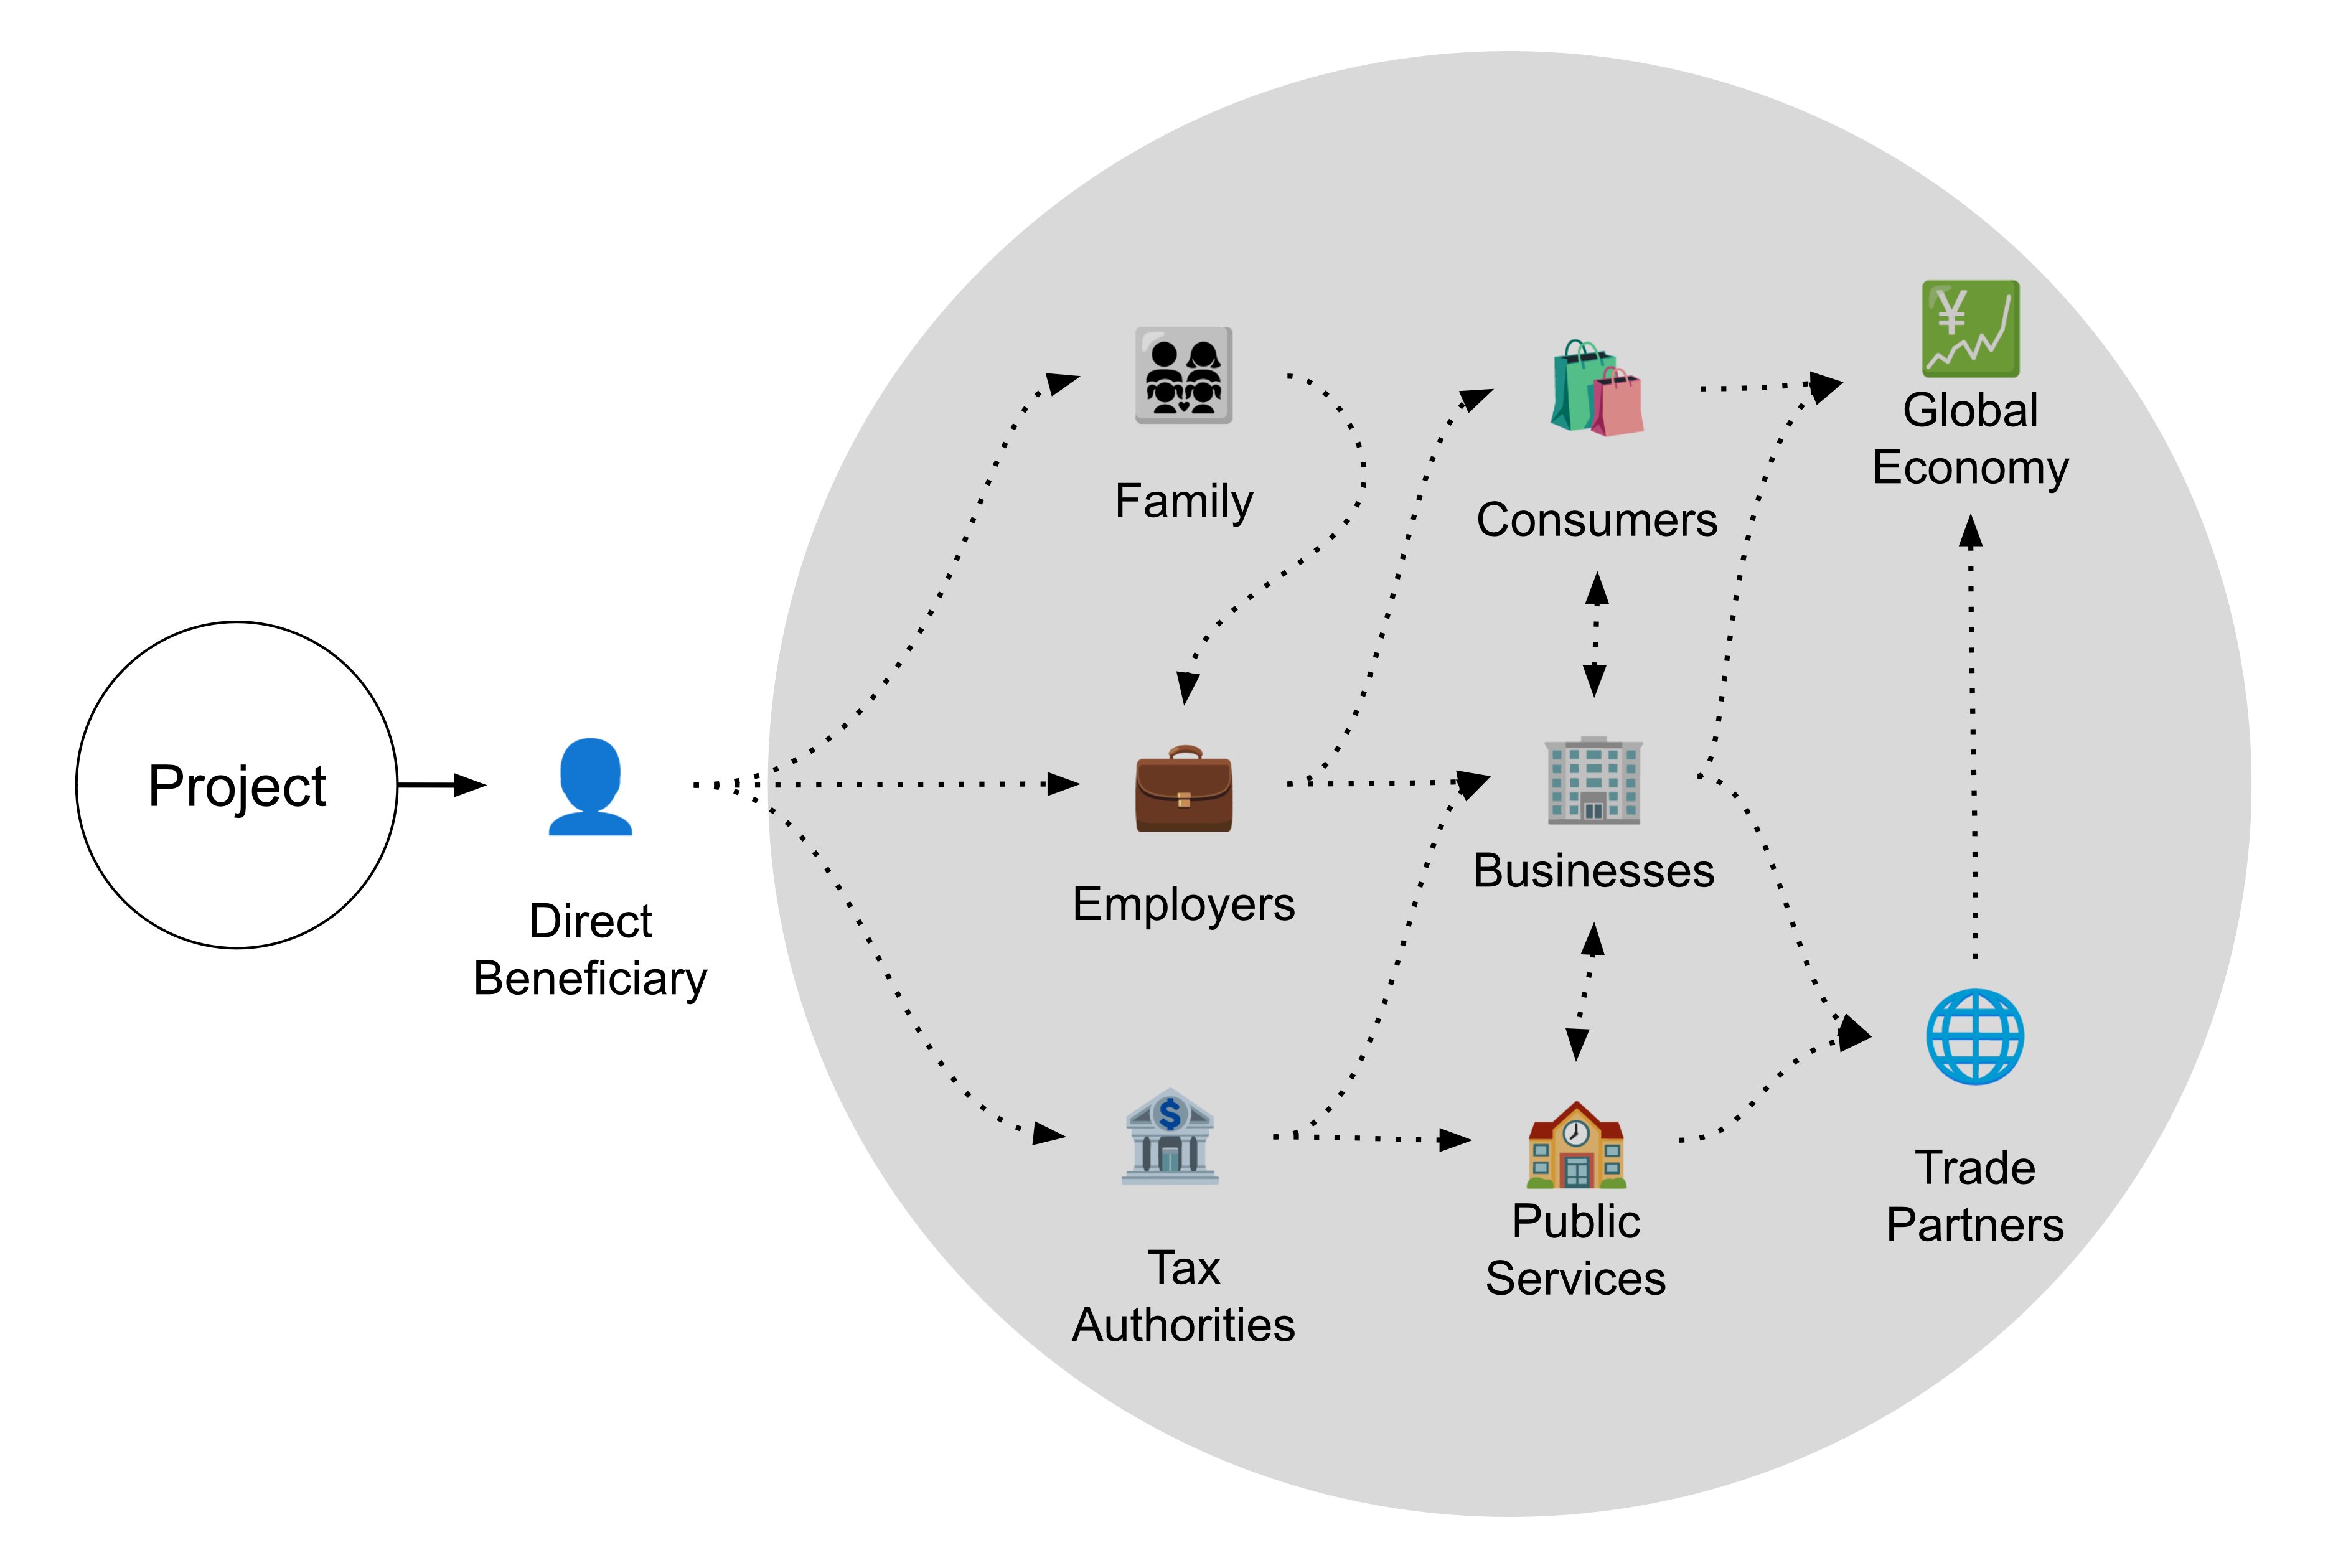 A diagram showing the various possible paths impact can take. After a project effects the direct beneficiary there are dotted lines of possible paths of how it can impact: family, employers, tax authorities, consumers, businesses, public services, trade partners and the global economy